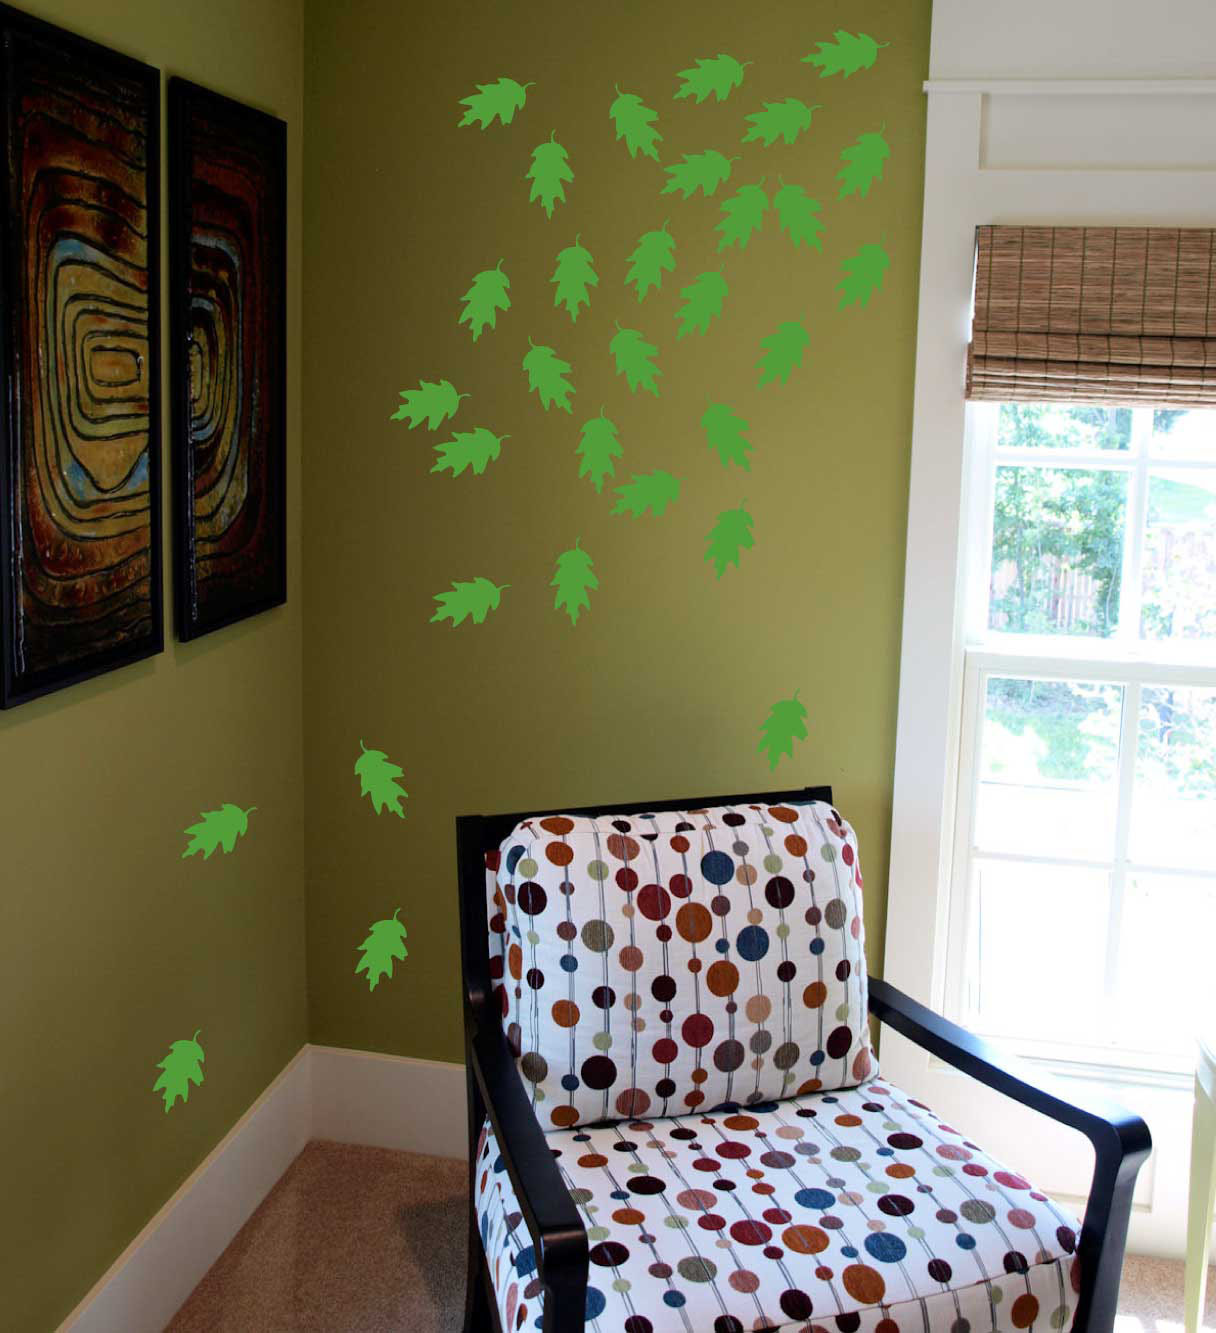 Leaves Wall Decals